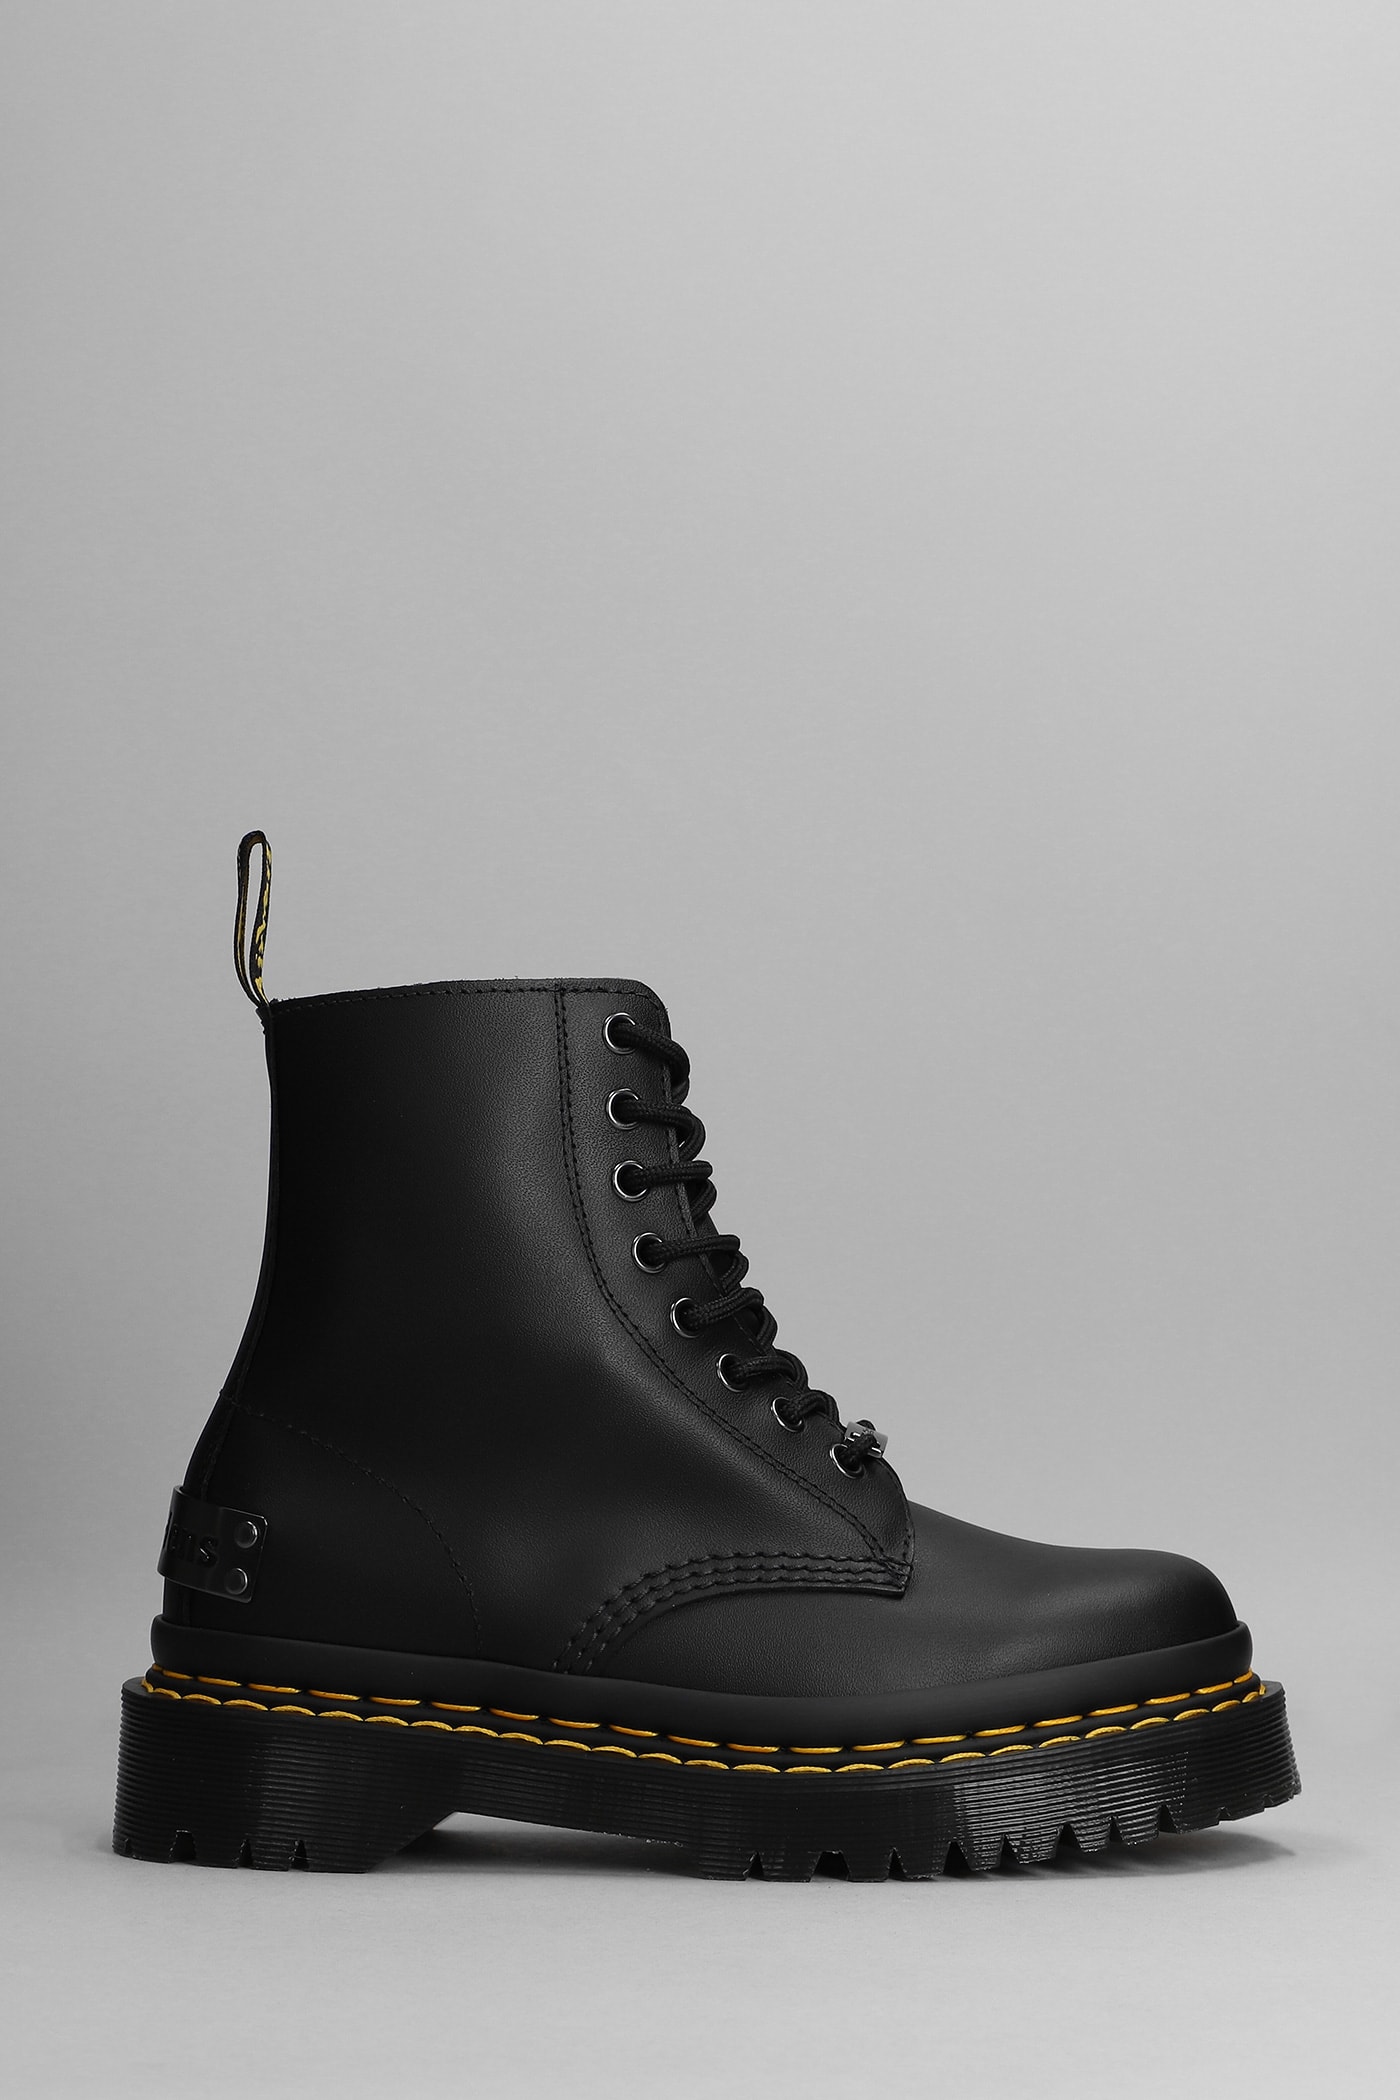 DR. MARTENS' 1460 BEX COMBAT BOOTS IN BLACK LEATHER